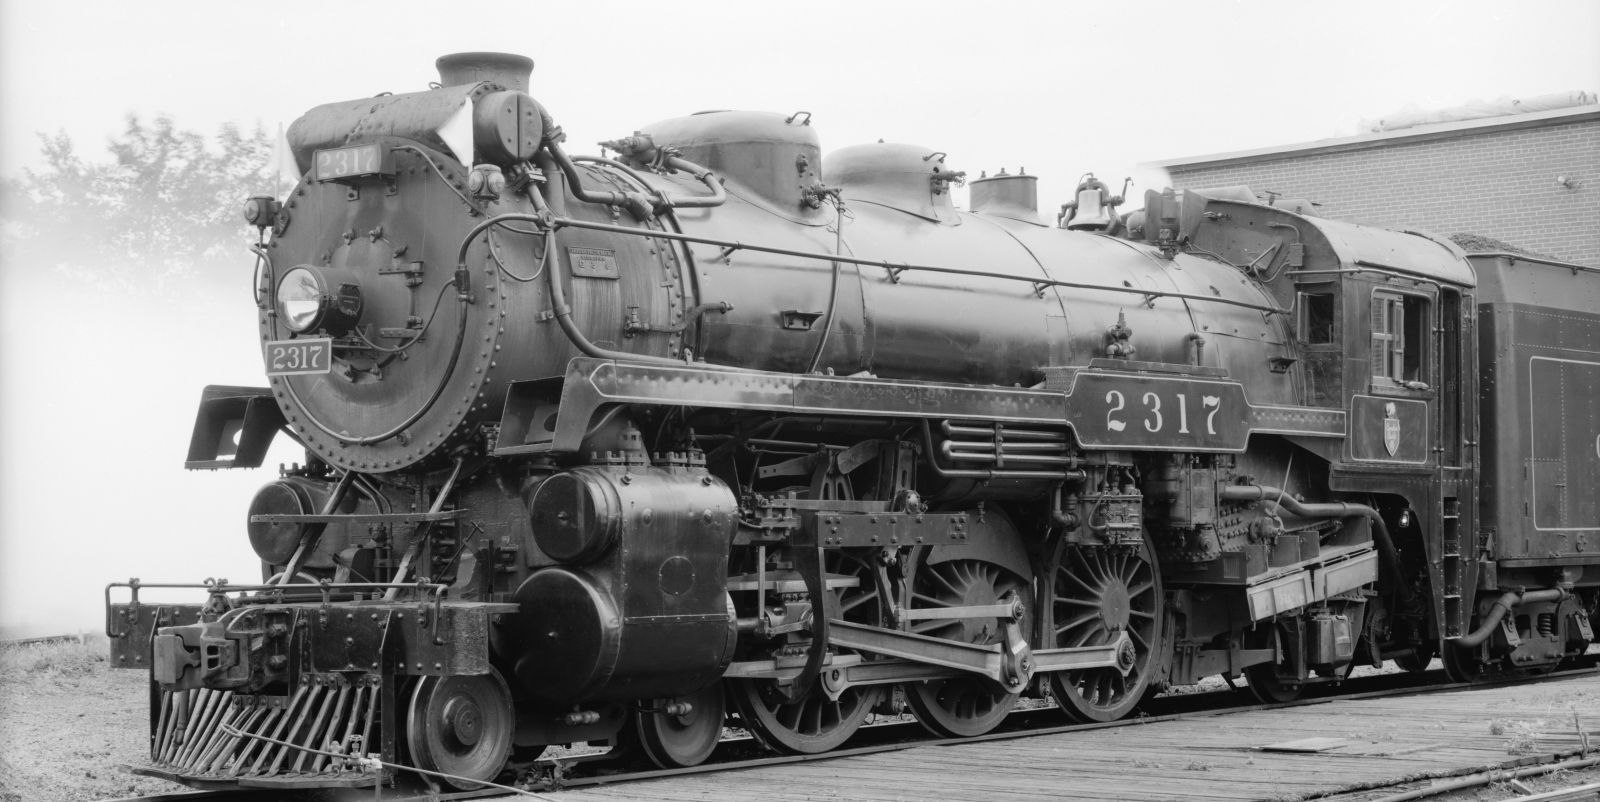 The surviving G3c No. 2317 in 1989